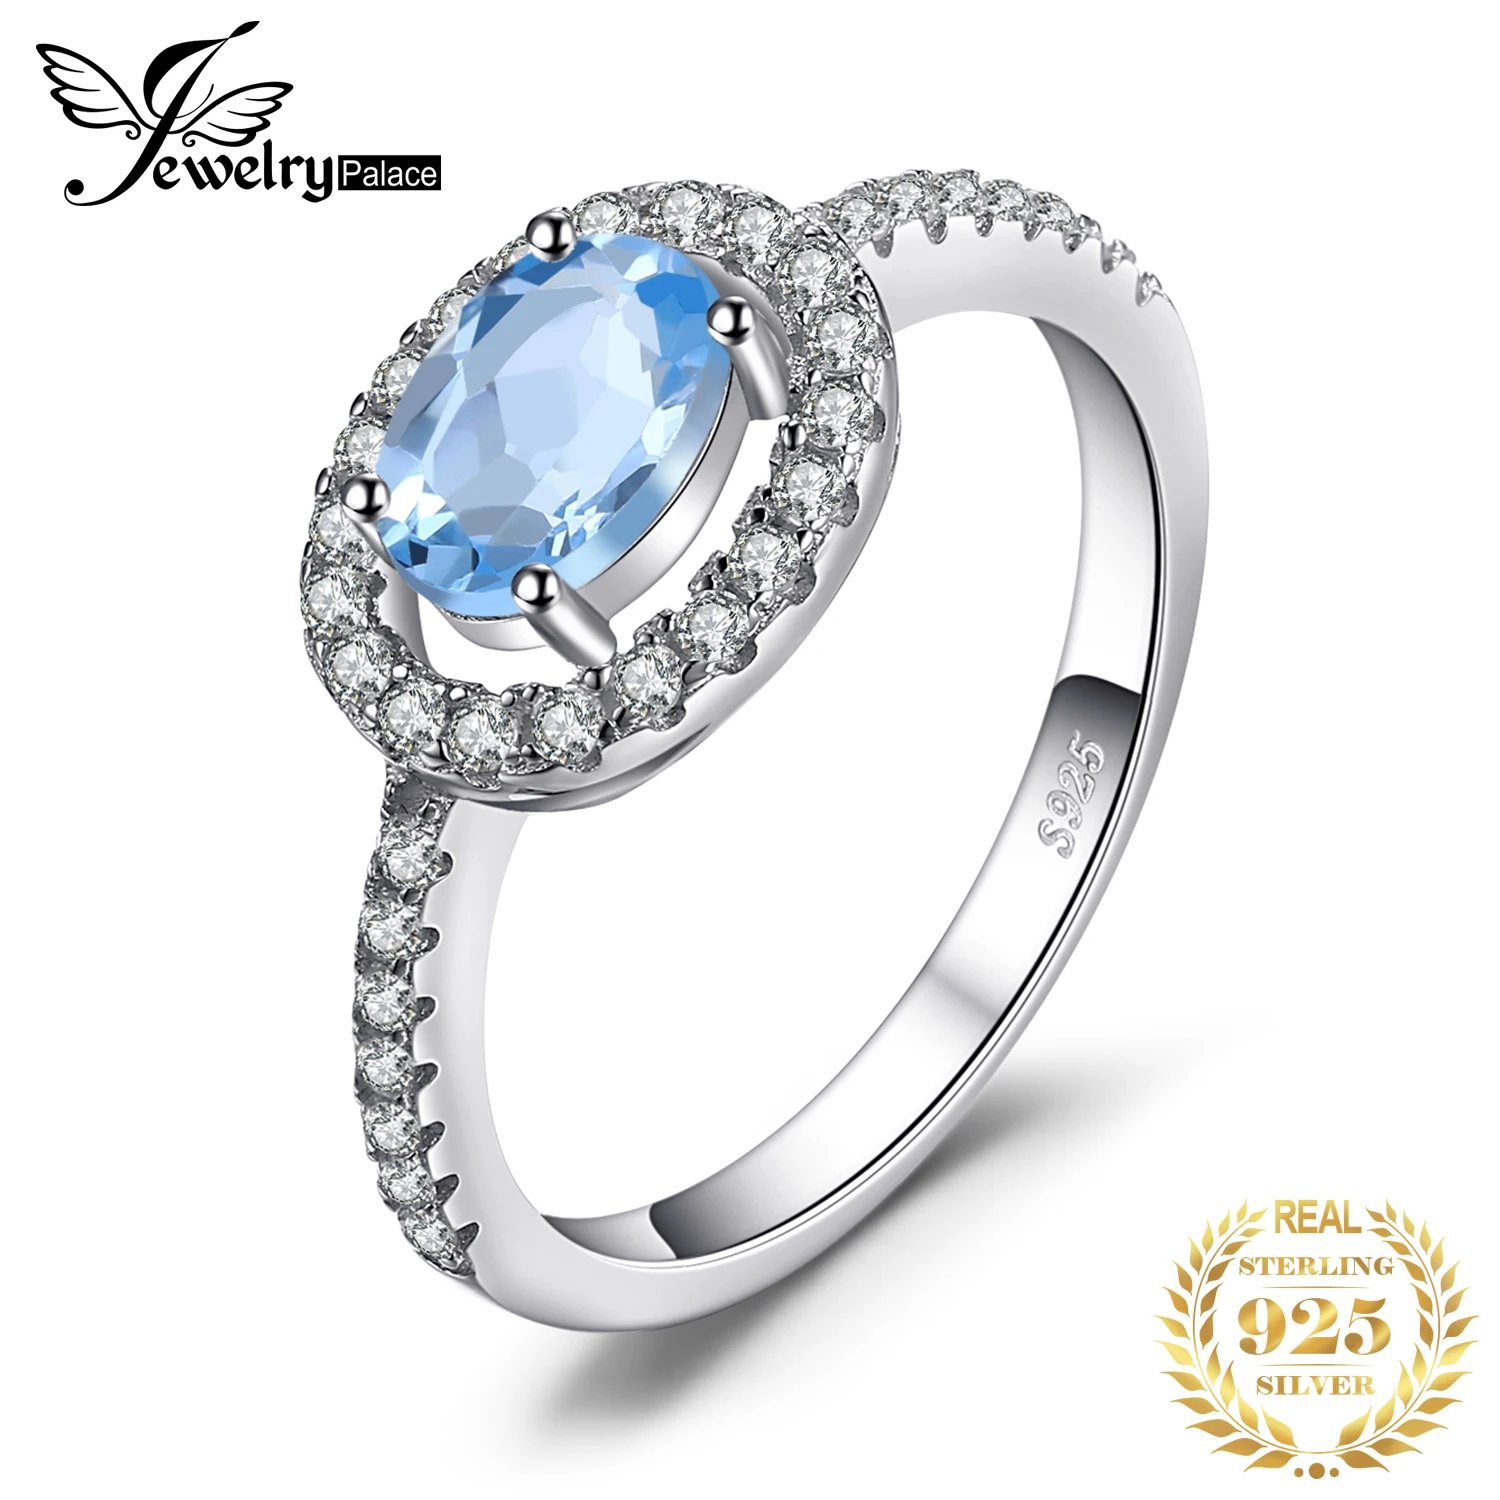 

JewelryPalace Oval Natural Blue Topaz 925 Sterling Silver Halo Ring for Woman Fashion Gemstone Wedding Engagement Promise Gift